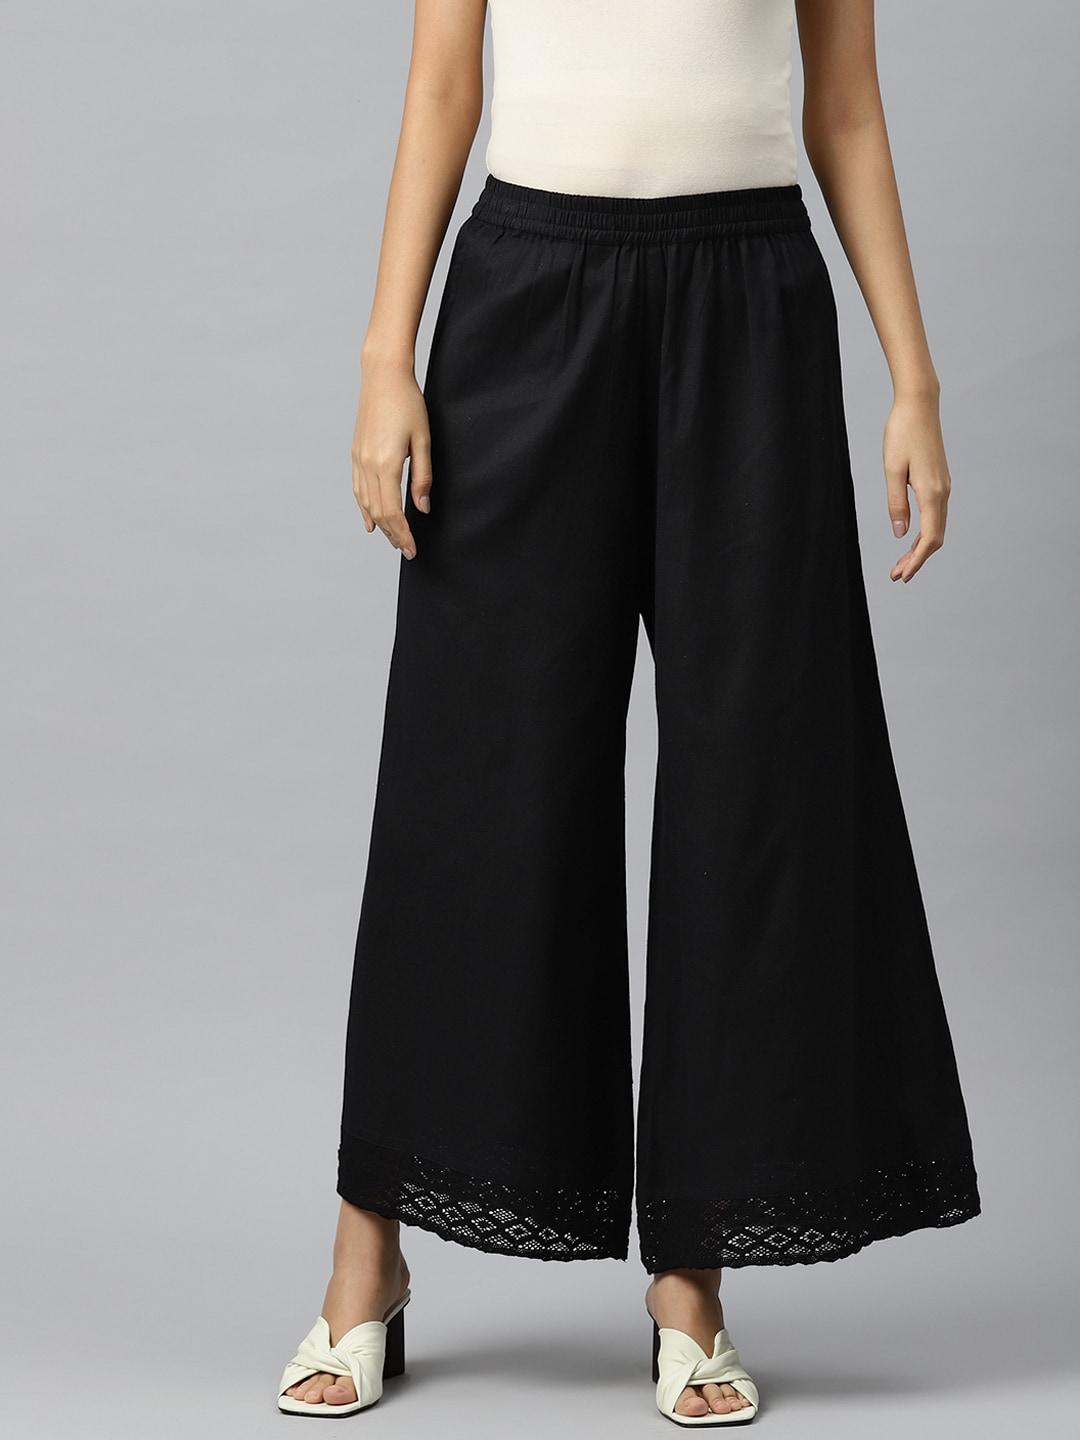 piroh women easy wash culottes trousers